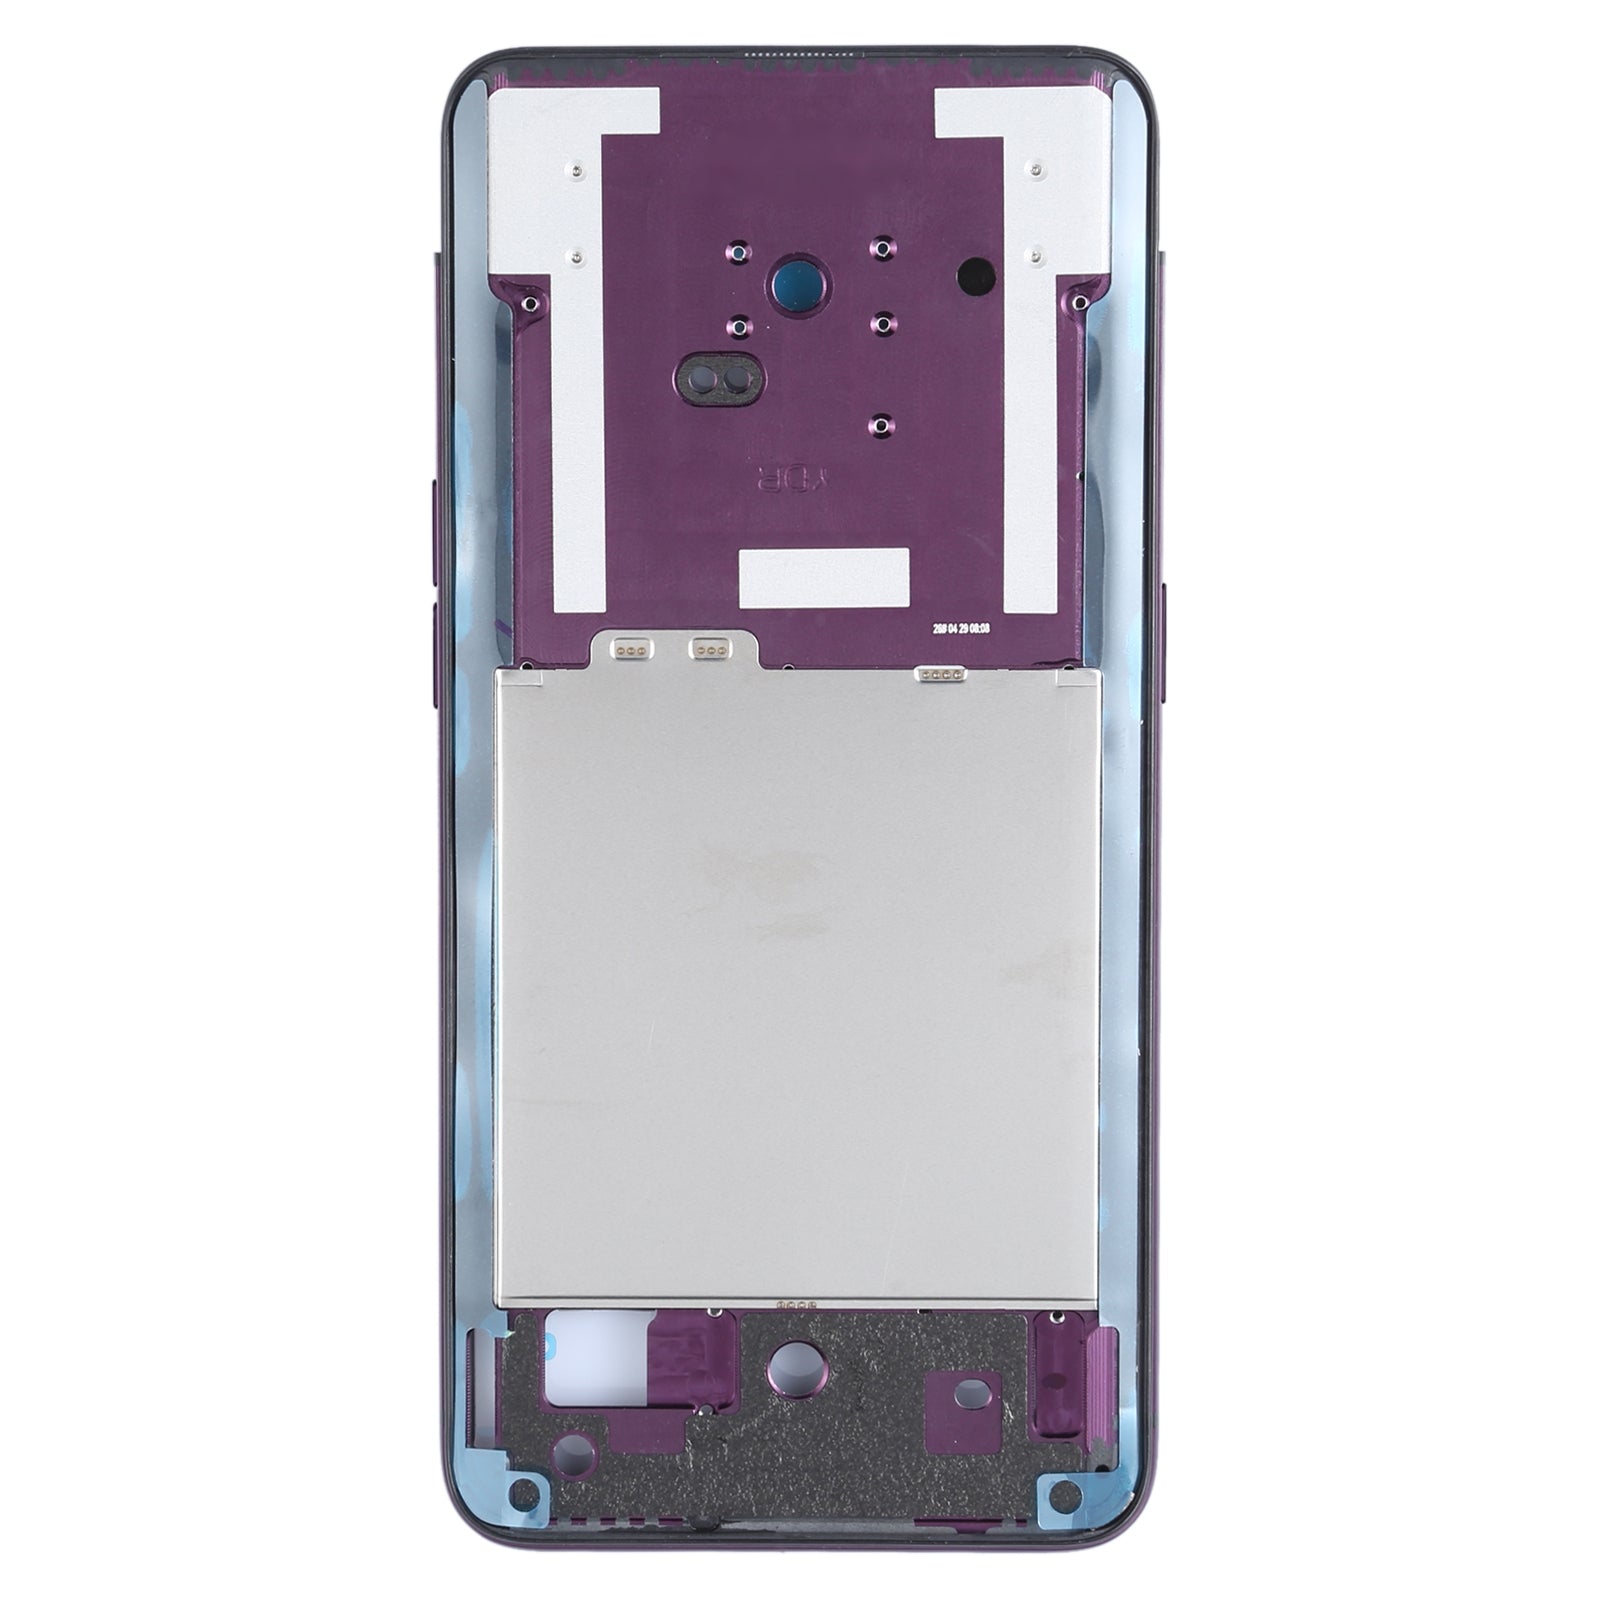 Châssis Châssis Intermédiaire LCD Oppo Find X CPP171.PAFM00 Rouge